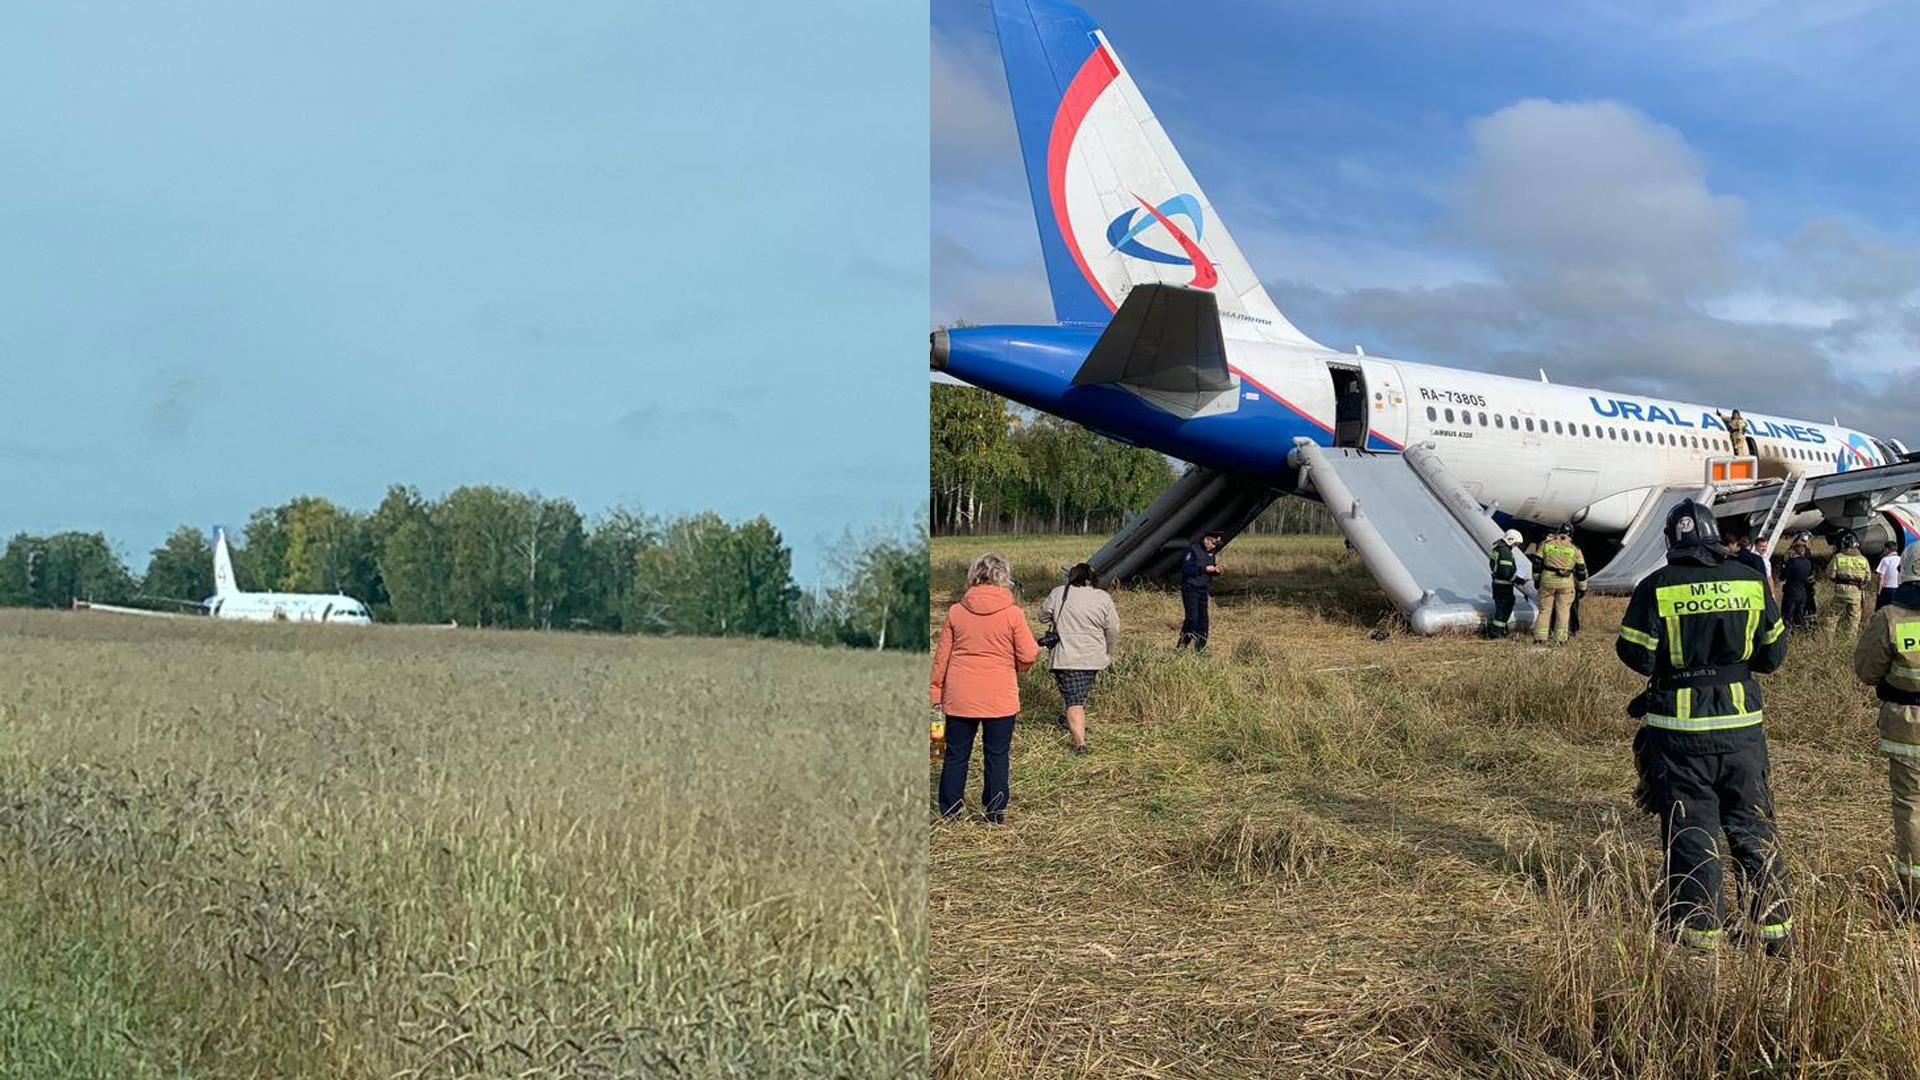 Expert on landing A320 in a wheat field: leaving for another airport could be a mistake